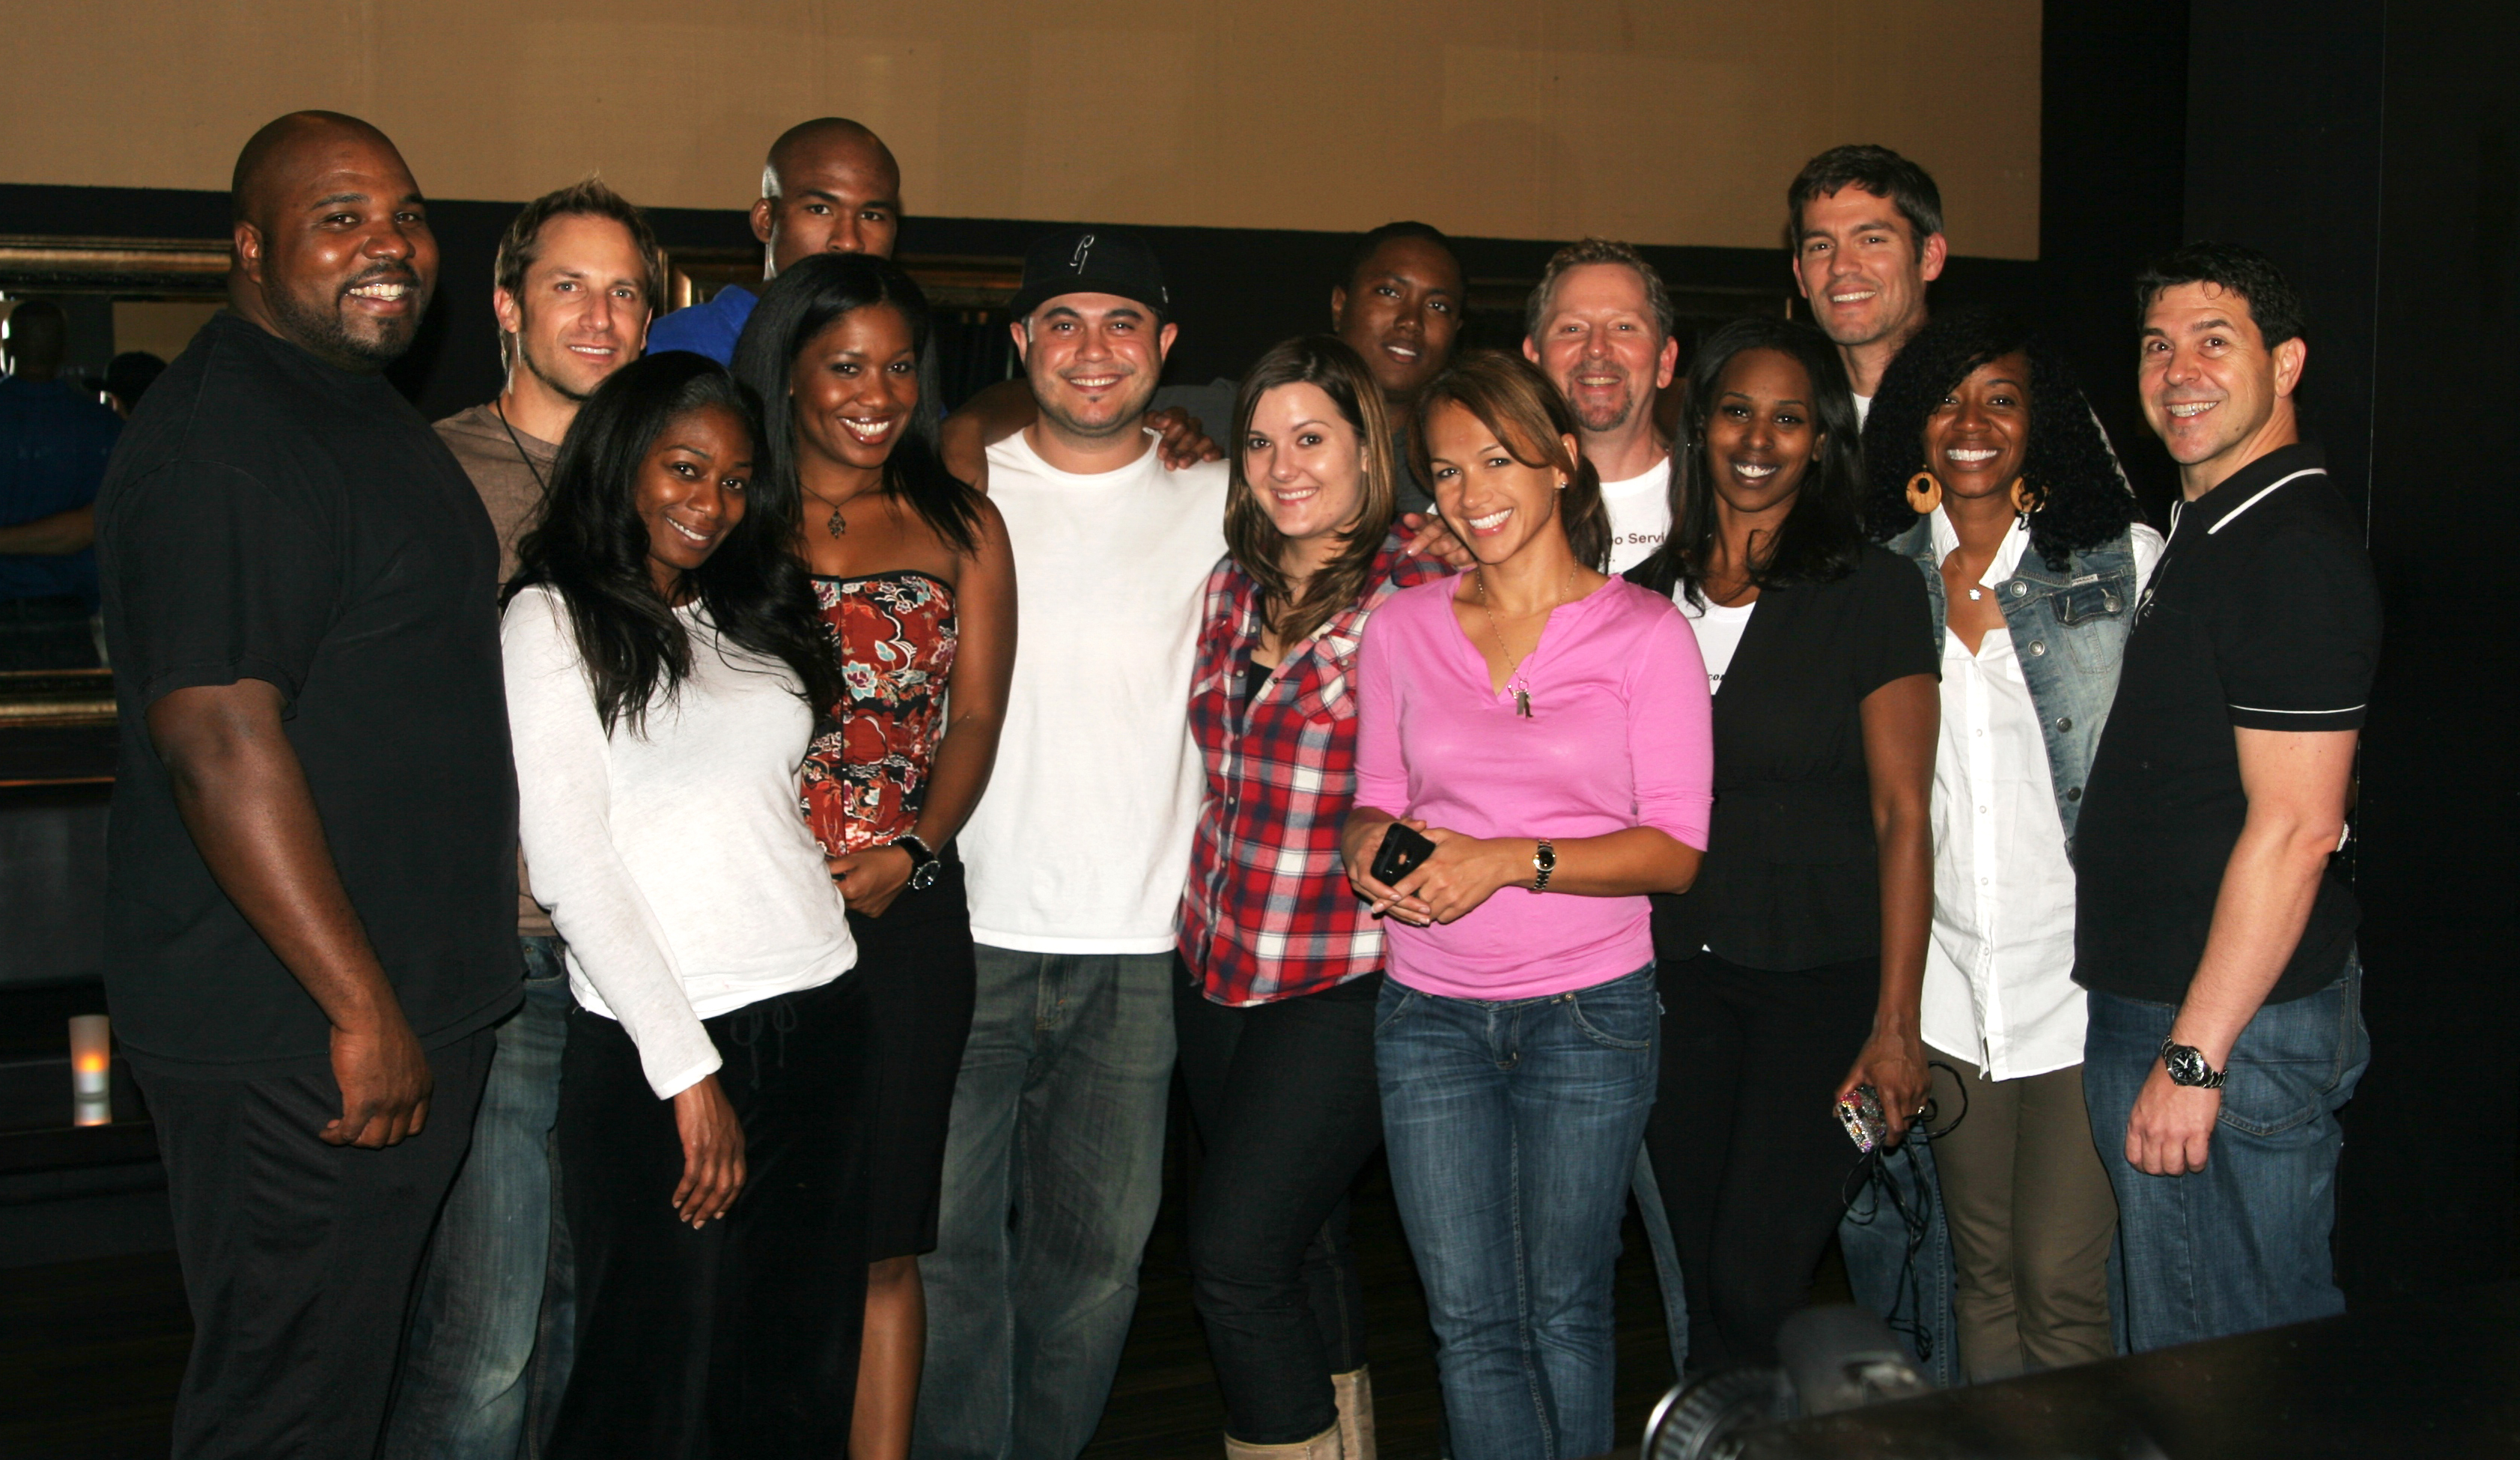 Director Inda Reid with the Producers and Crew of the romantic comedy 